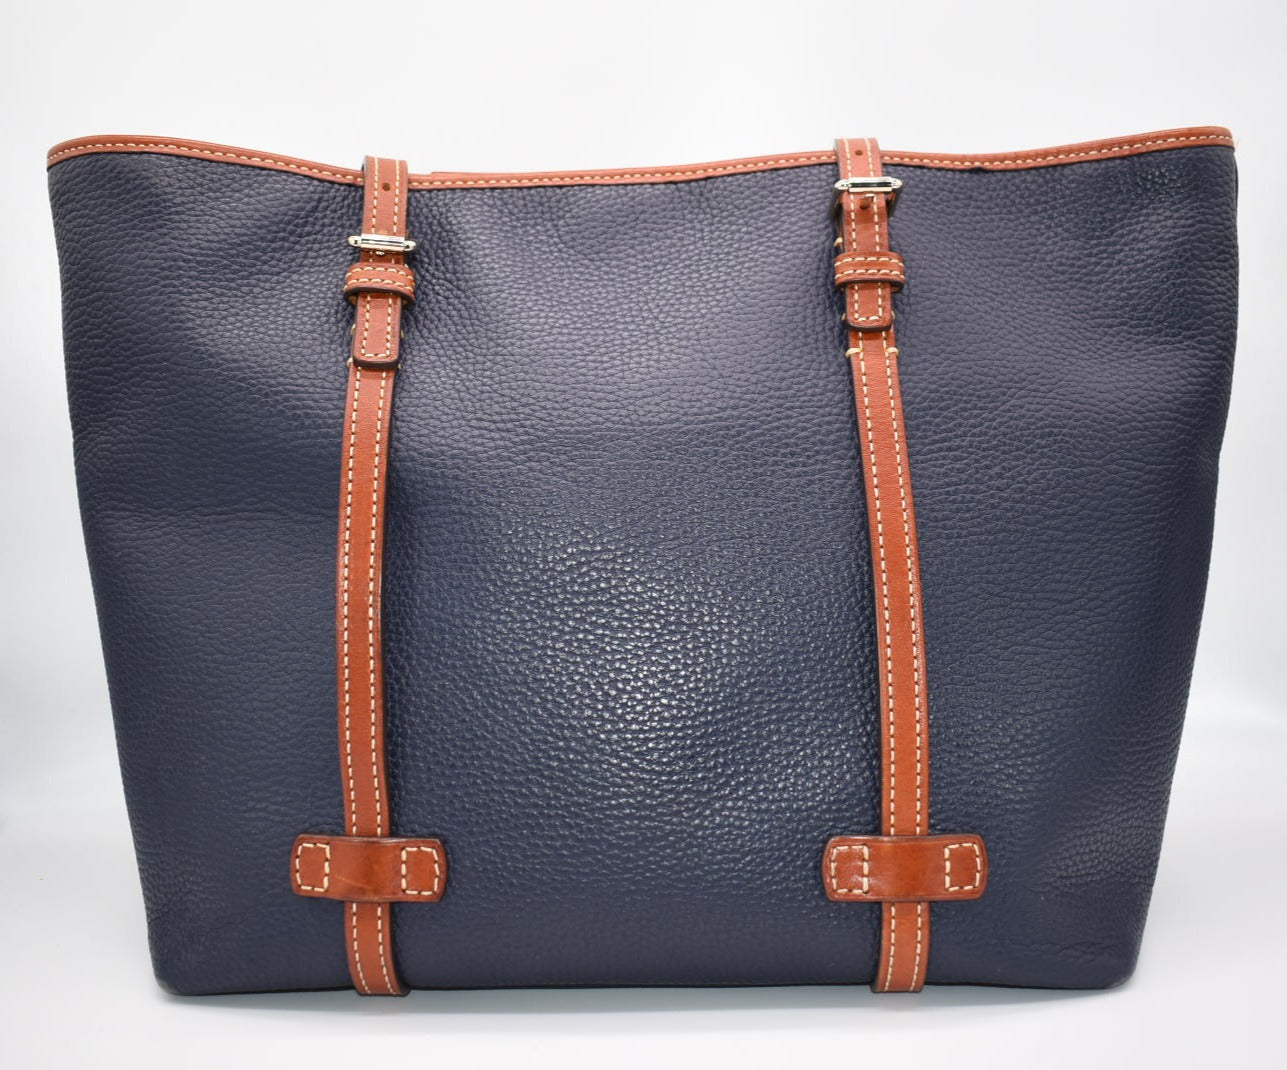 Dooney & Bourke Pebbled Leather Tote Bag in Navy Blue